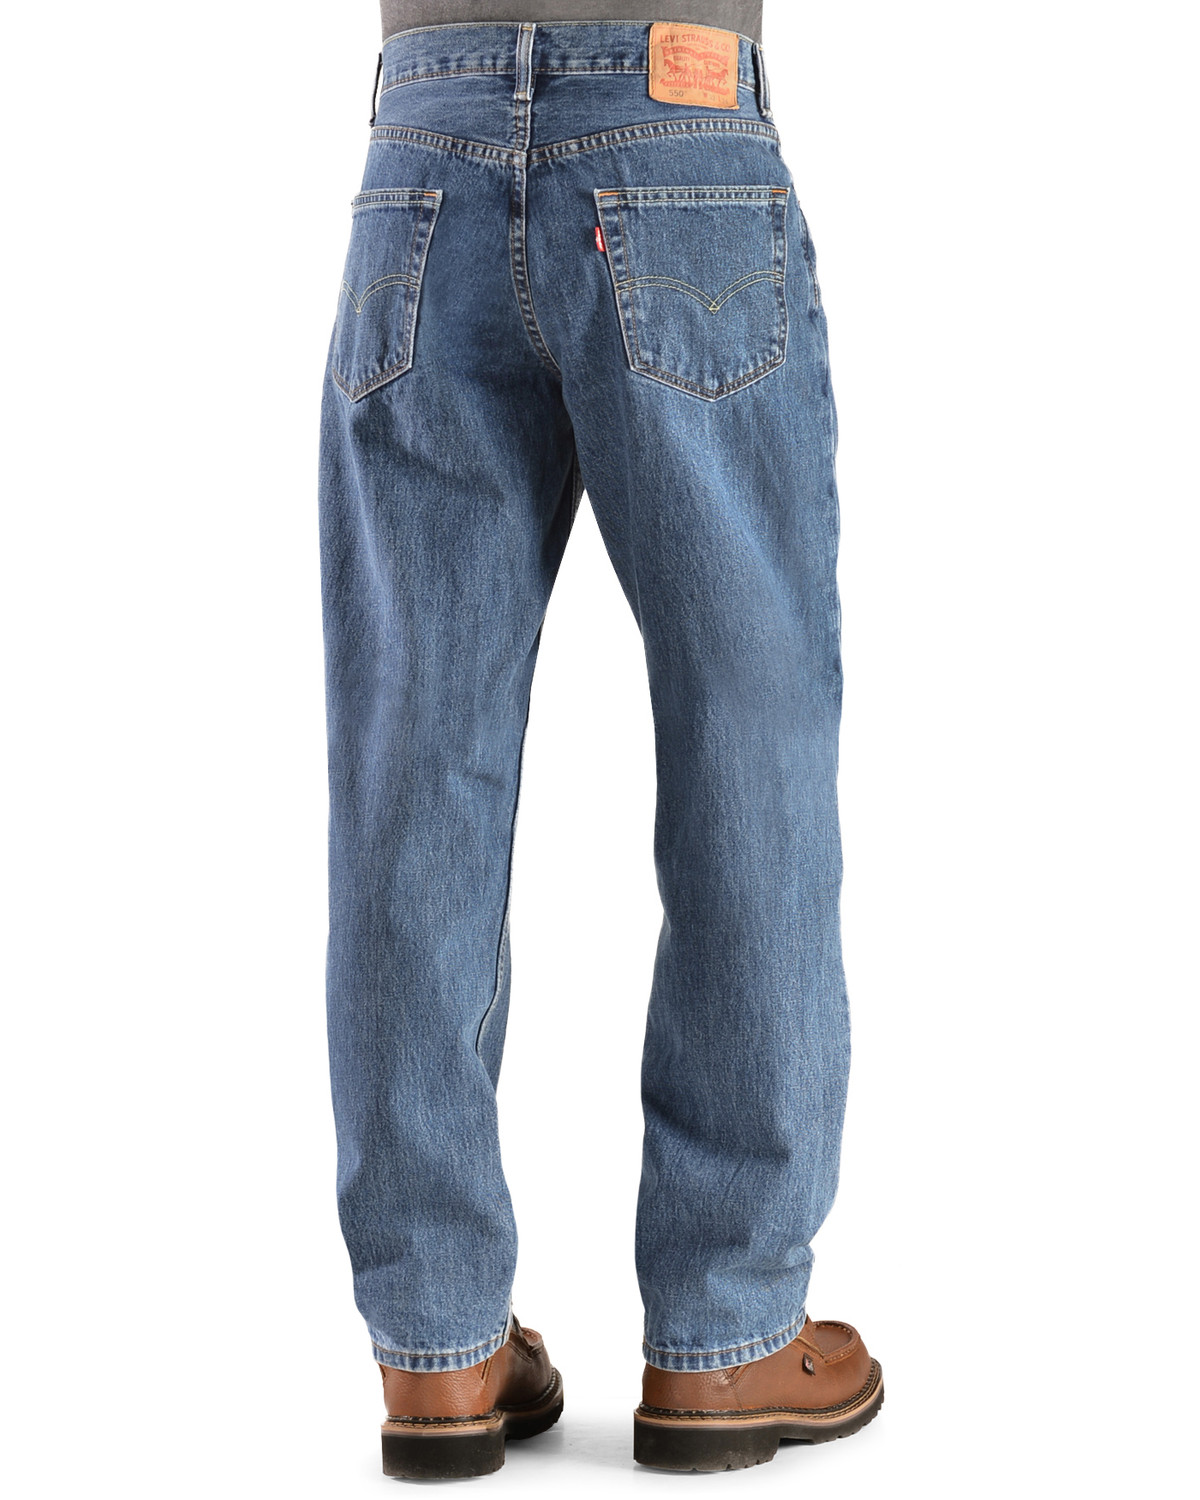 Levi's 550 Jeans - Prewashed Relaxed Fit - Country Outfitter